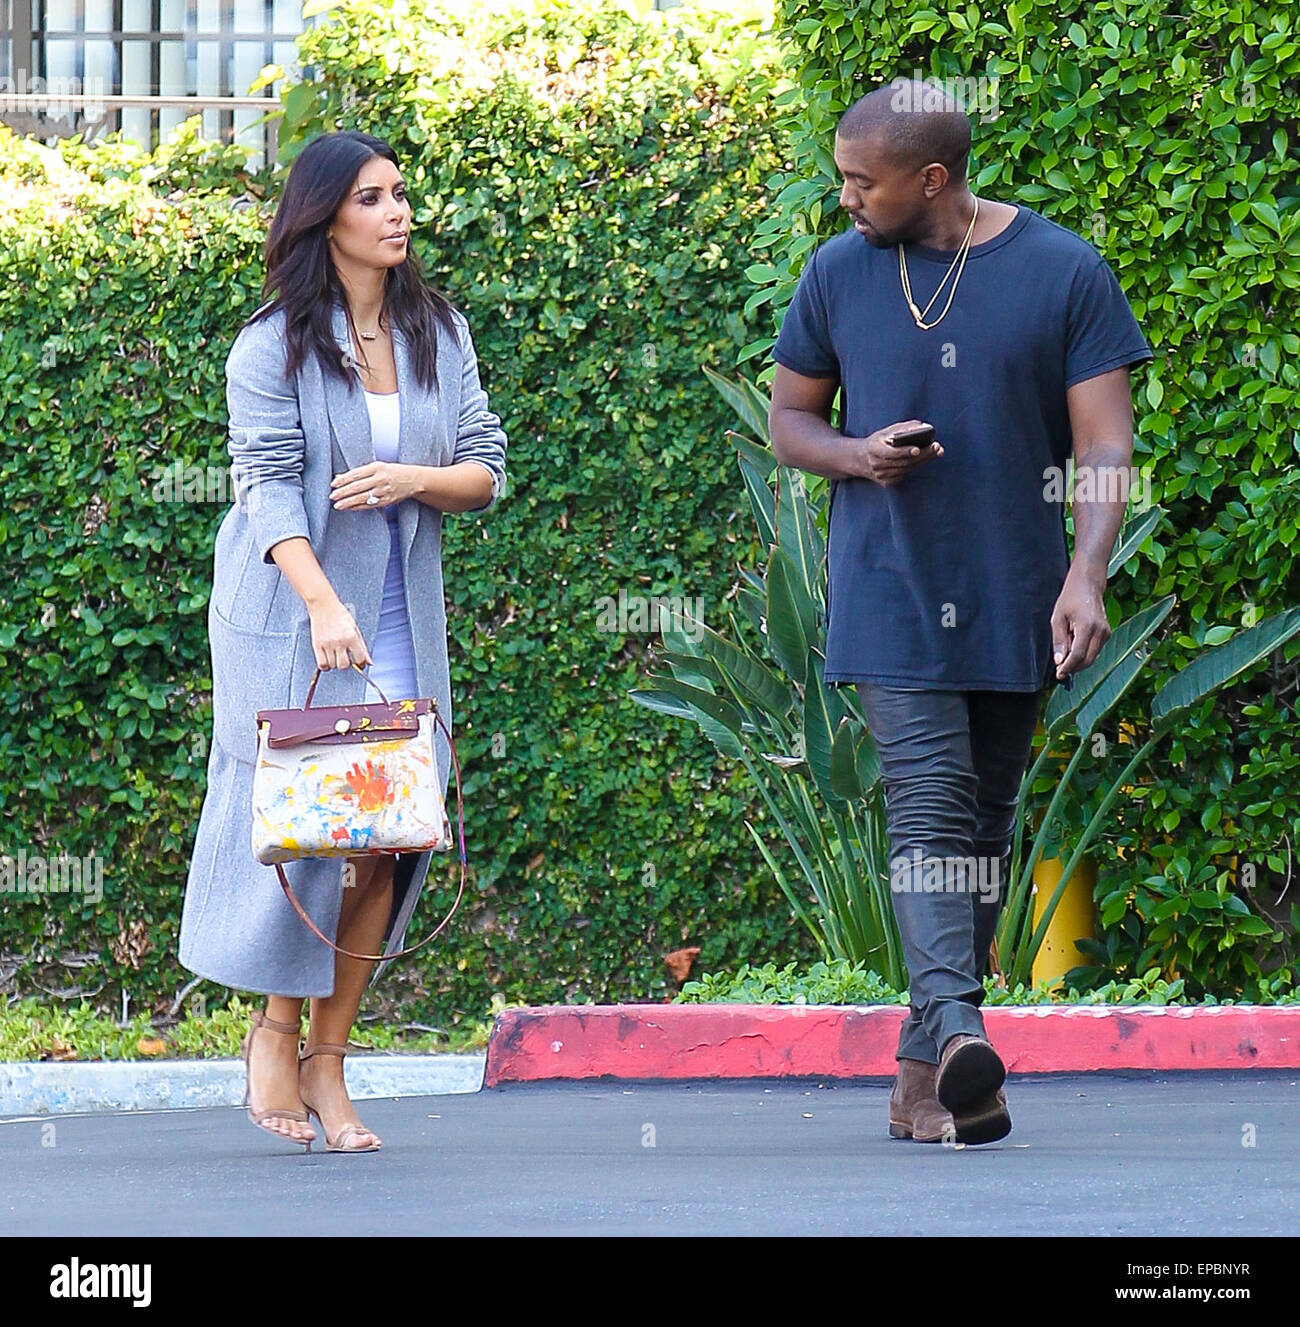 Kanye West and Kim Kardashian, who's holding an original Hermes bag painted  by their daughter North, head to the Kardashians' office in Los Angeles  Featuring: Kanye West, Kim Kardashian Where: Los Angeles